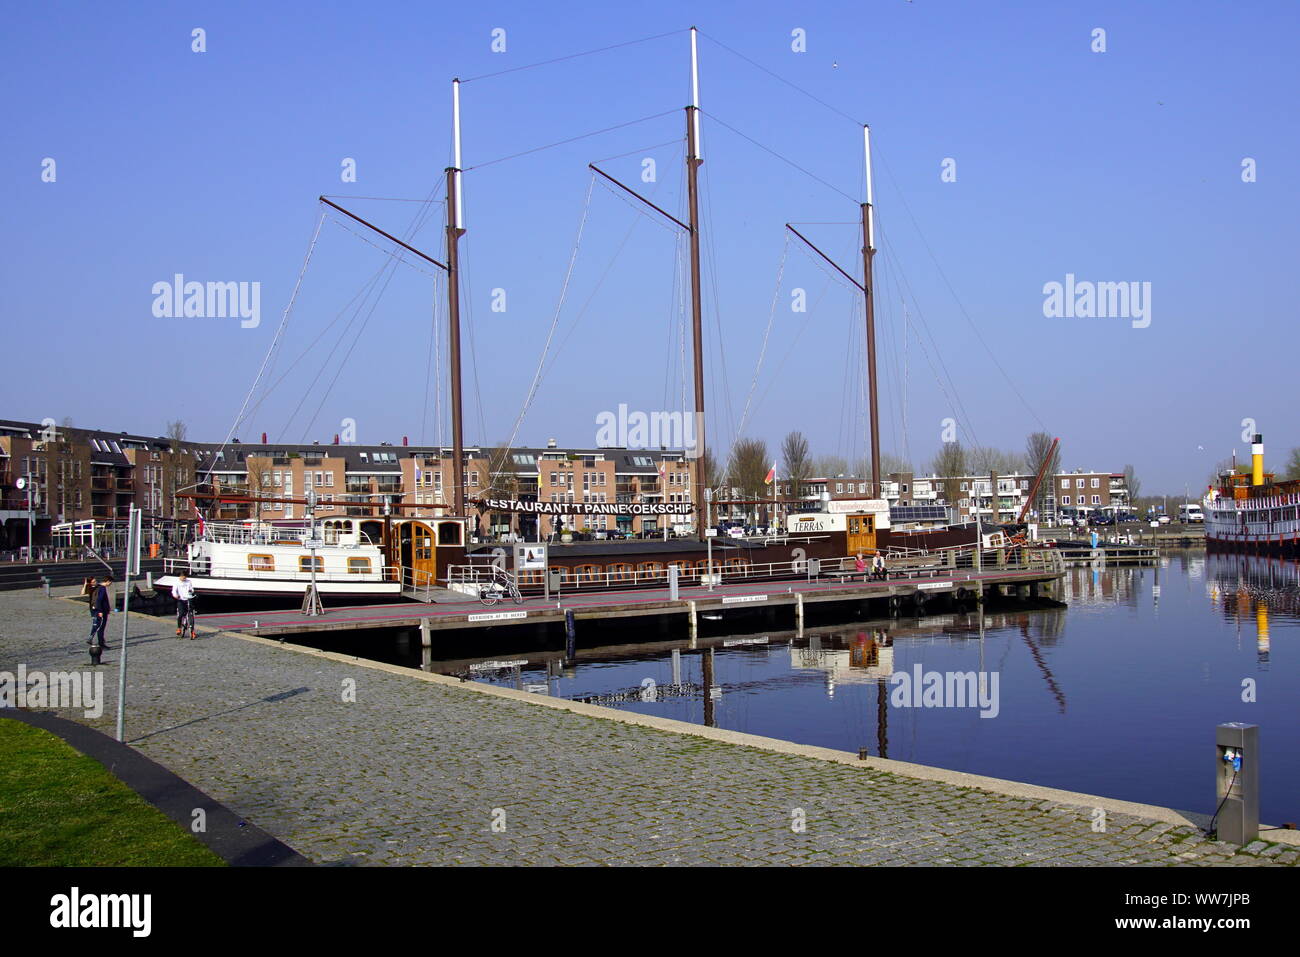 Almere, the Netherlands - March 29, 2019: Pancake restaurant ship the harbor of Almere Haven. Stock Photo